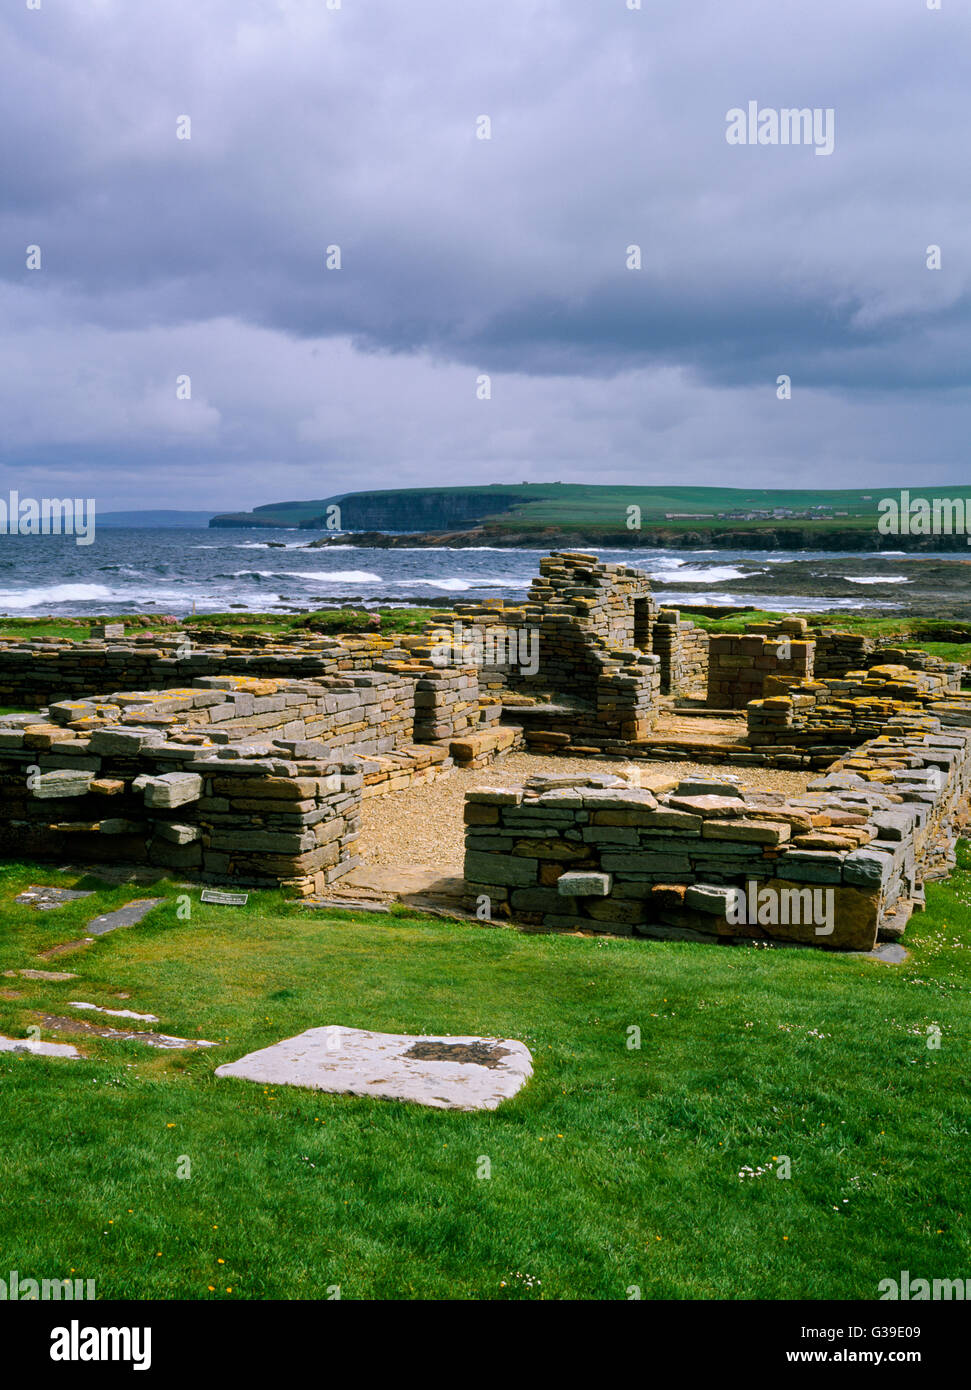 View E of the early C12th Romanesque church, part of the Viking-age settlement on the tidal island of Brough of Birsay, Orkney. Stock Photo